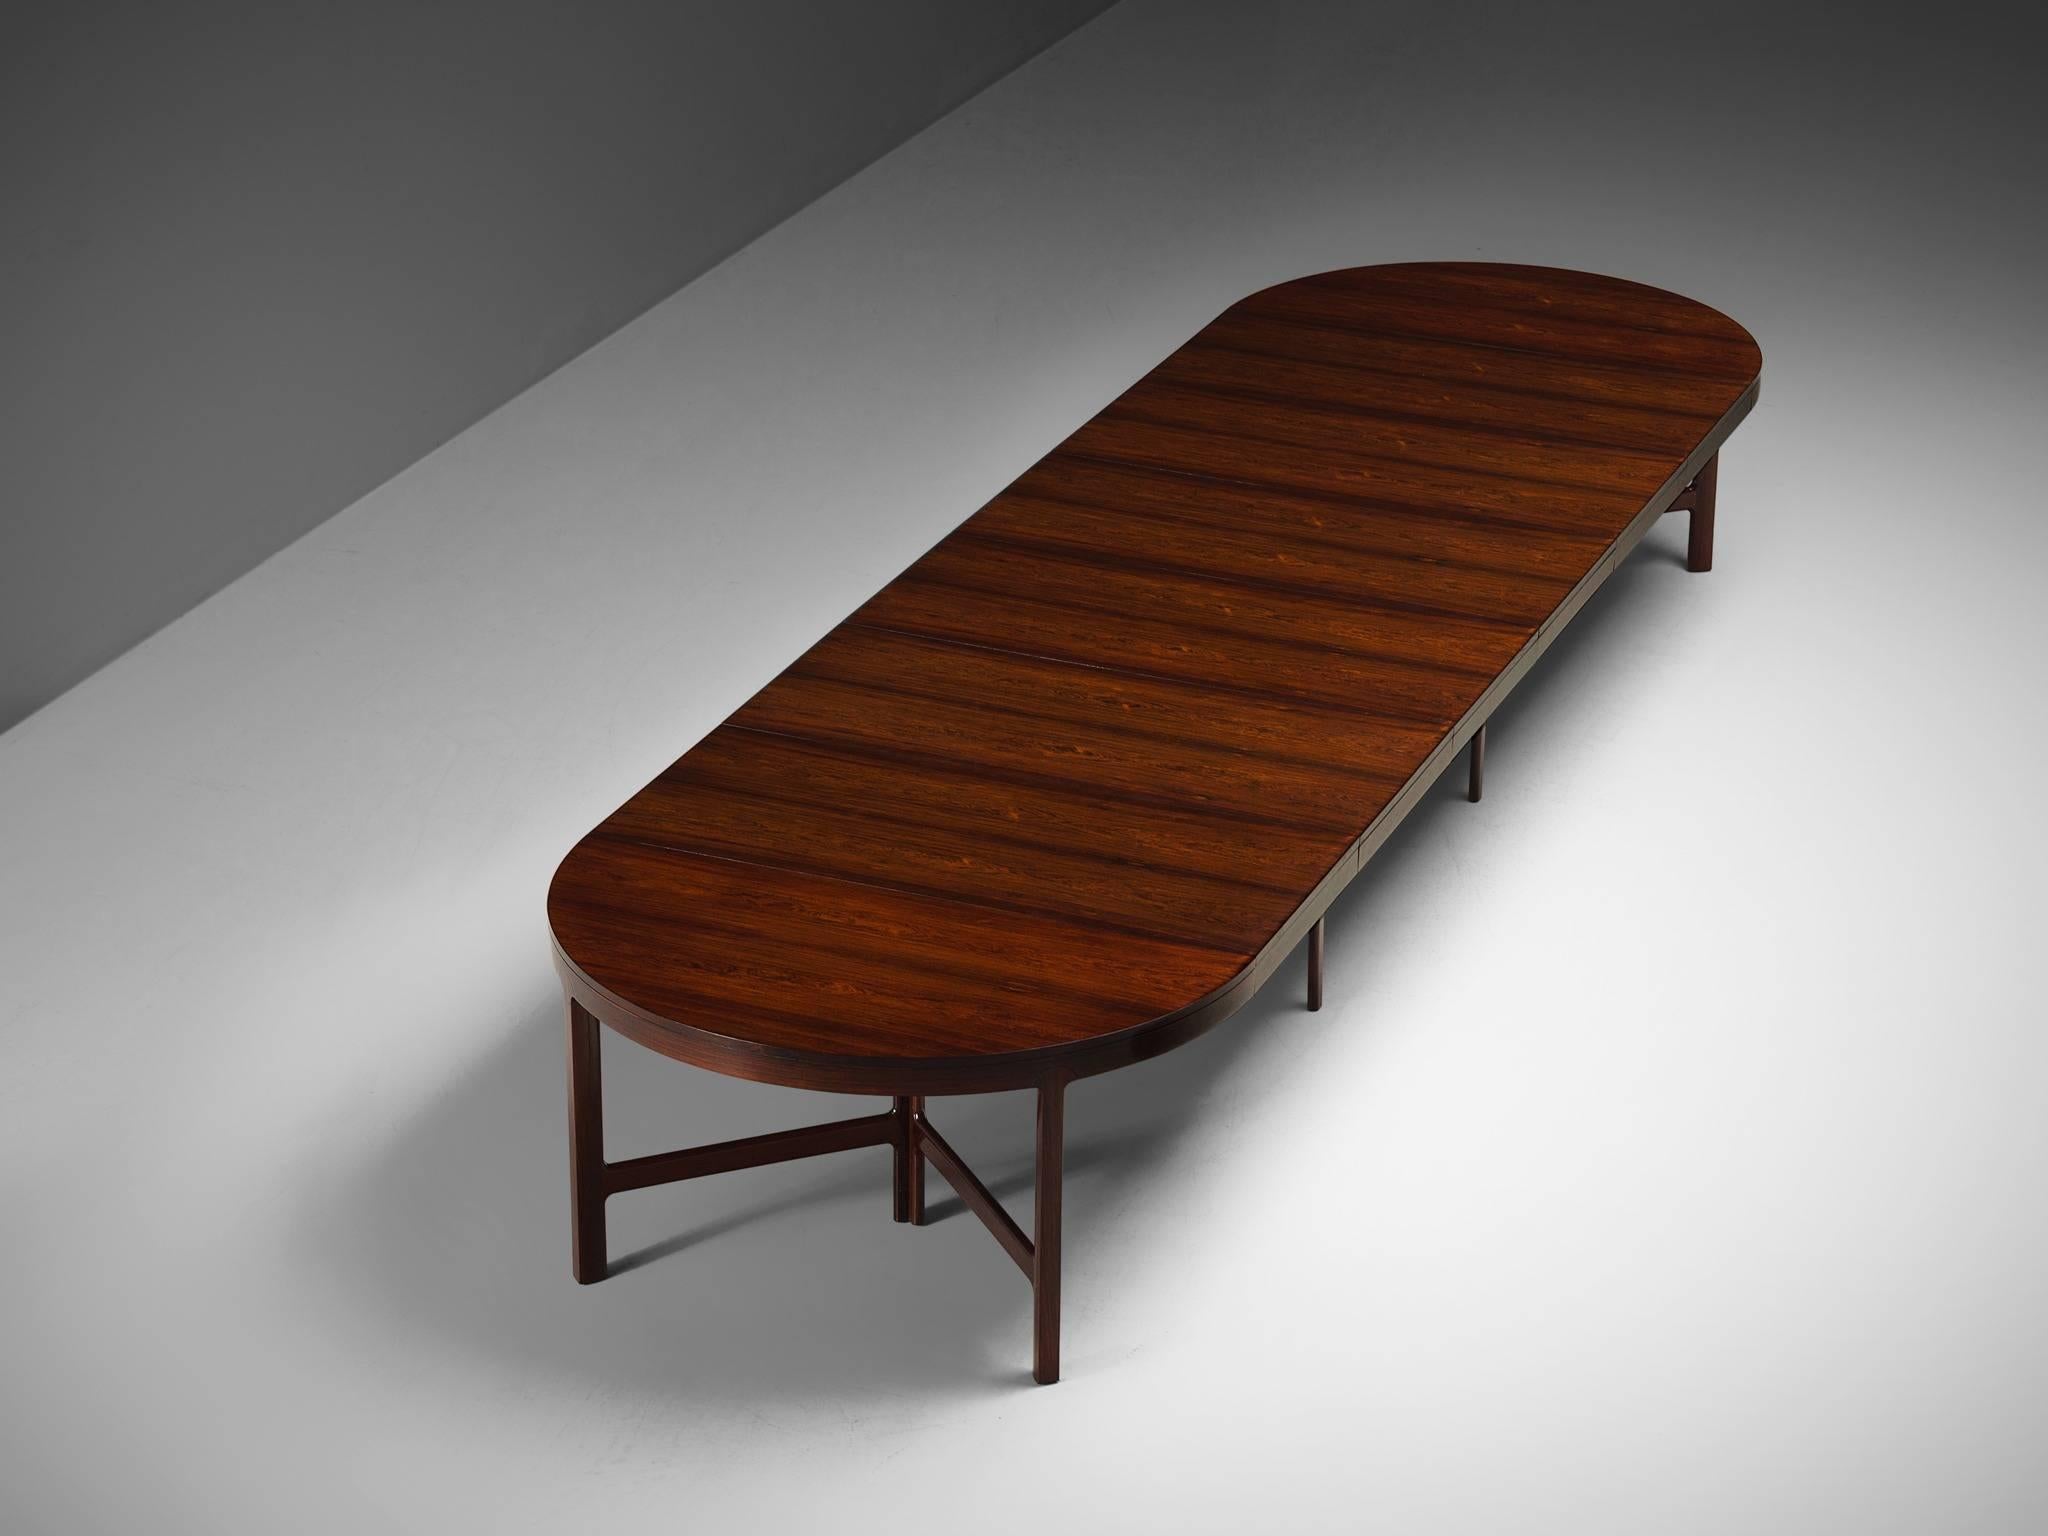 Scandinavian Modern Unique Rosewood Table by Danish Master Cabinet Maker